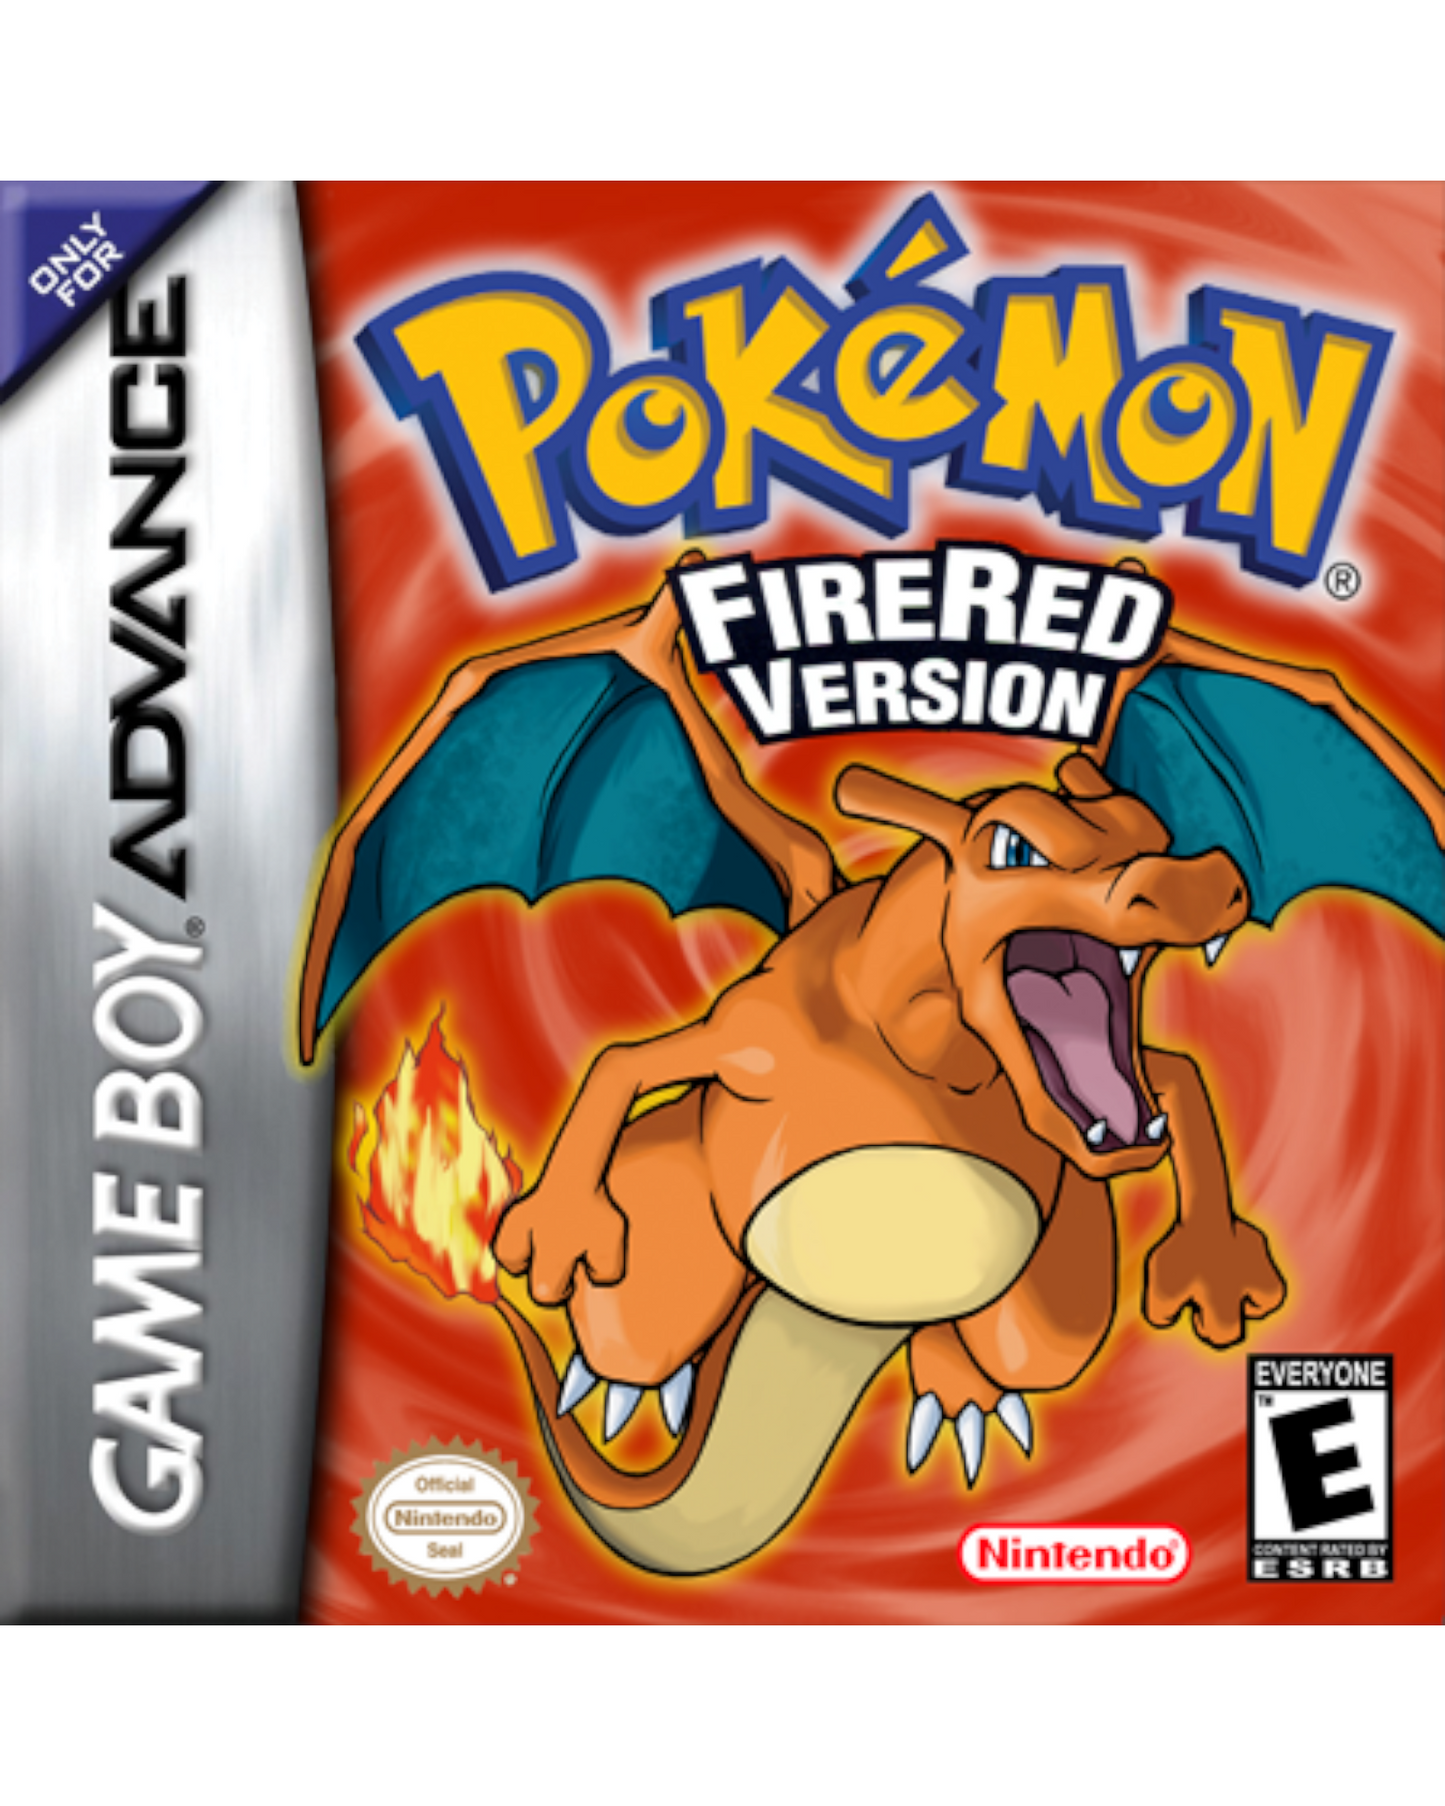 Pokemon Fire Red Version - Play Game Online